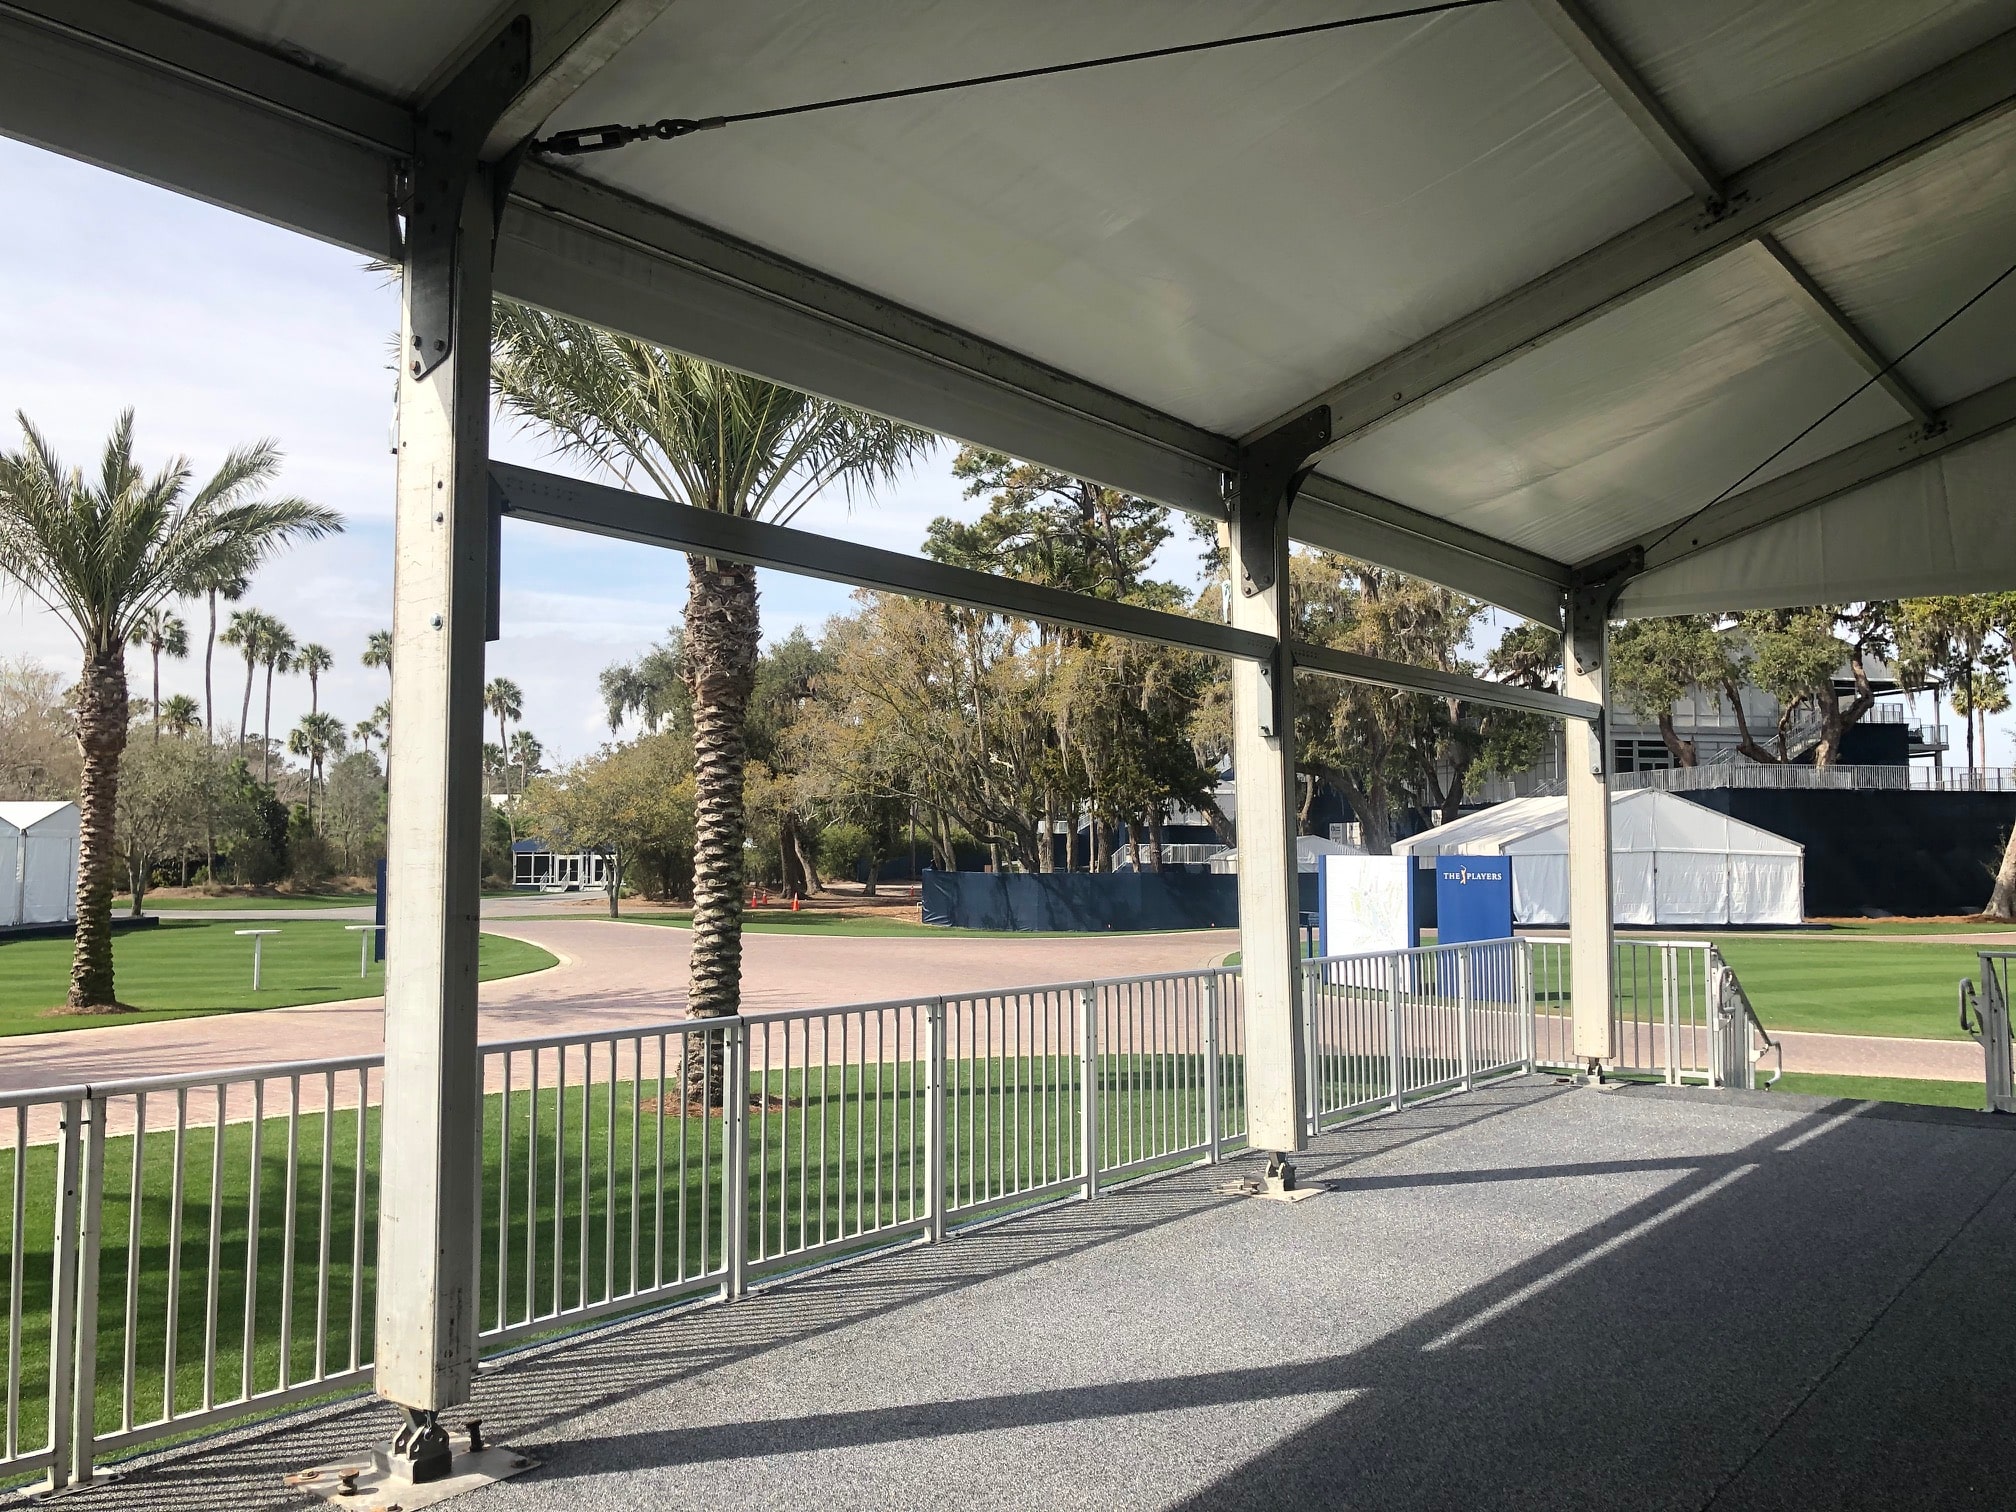 Why You Need a Temporary Construction Tent - American Pavilion